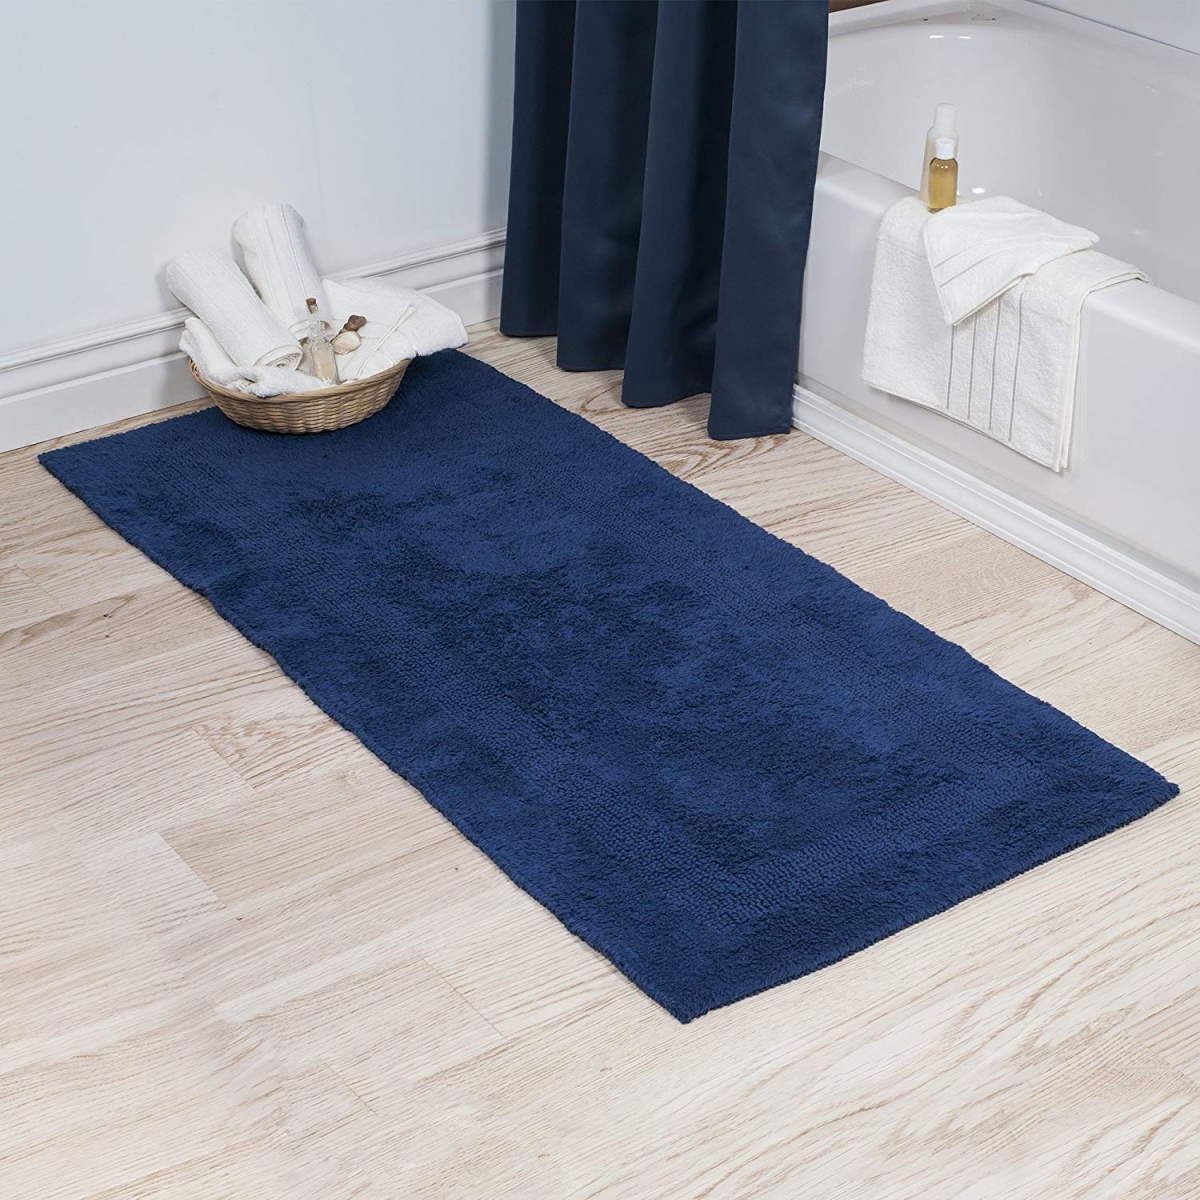 Picture of Bedford Home 67A-01615 100 Percent Cotton Reversible Long Bath Rug - Navy - 24 x 60 in.